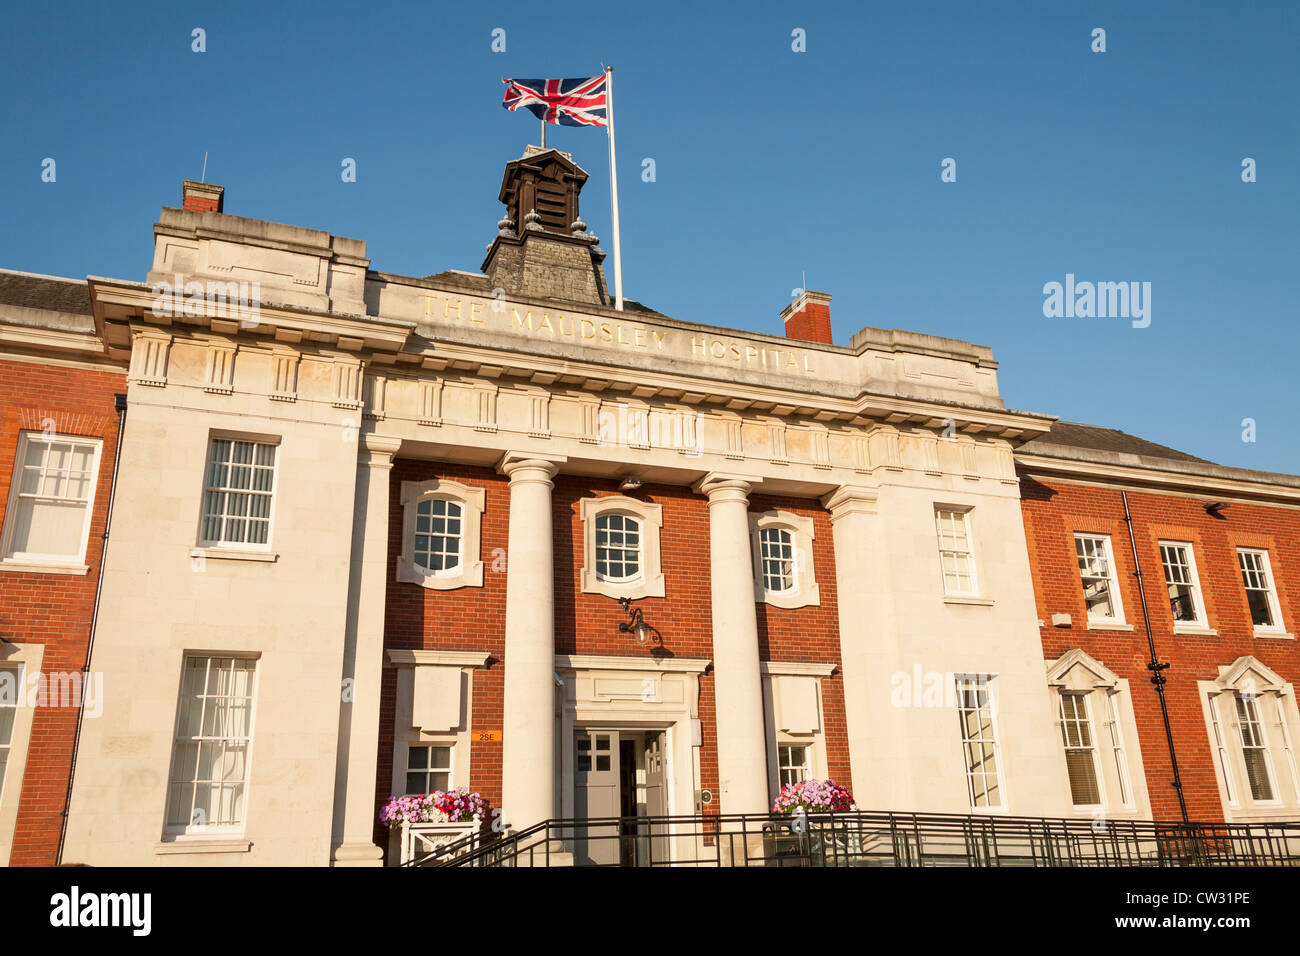 Maudsley Hospital, Denmark Hill, Camberwell, Londres, Angleterre Banque D'Images